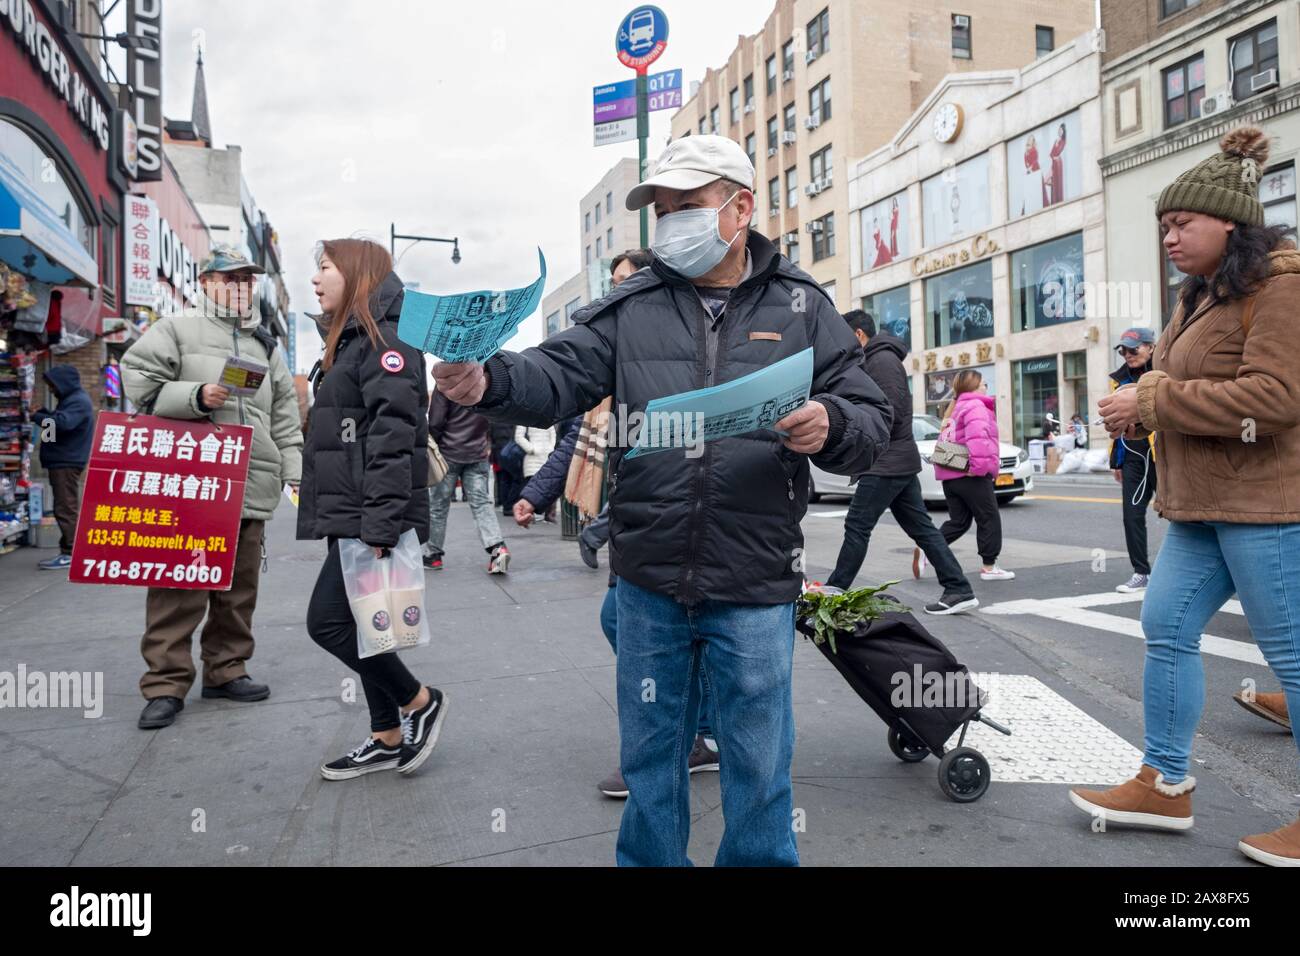 A Chinese American man wearing a surgical mask hands out Chinese language advertising flyers on Main St. & Roosevelt Ave. in Chinatown, Flushing, NYC. Stock Photo